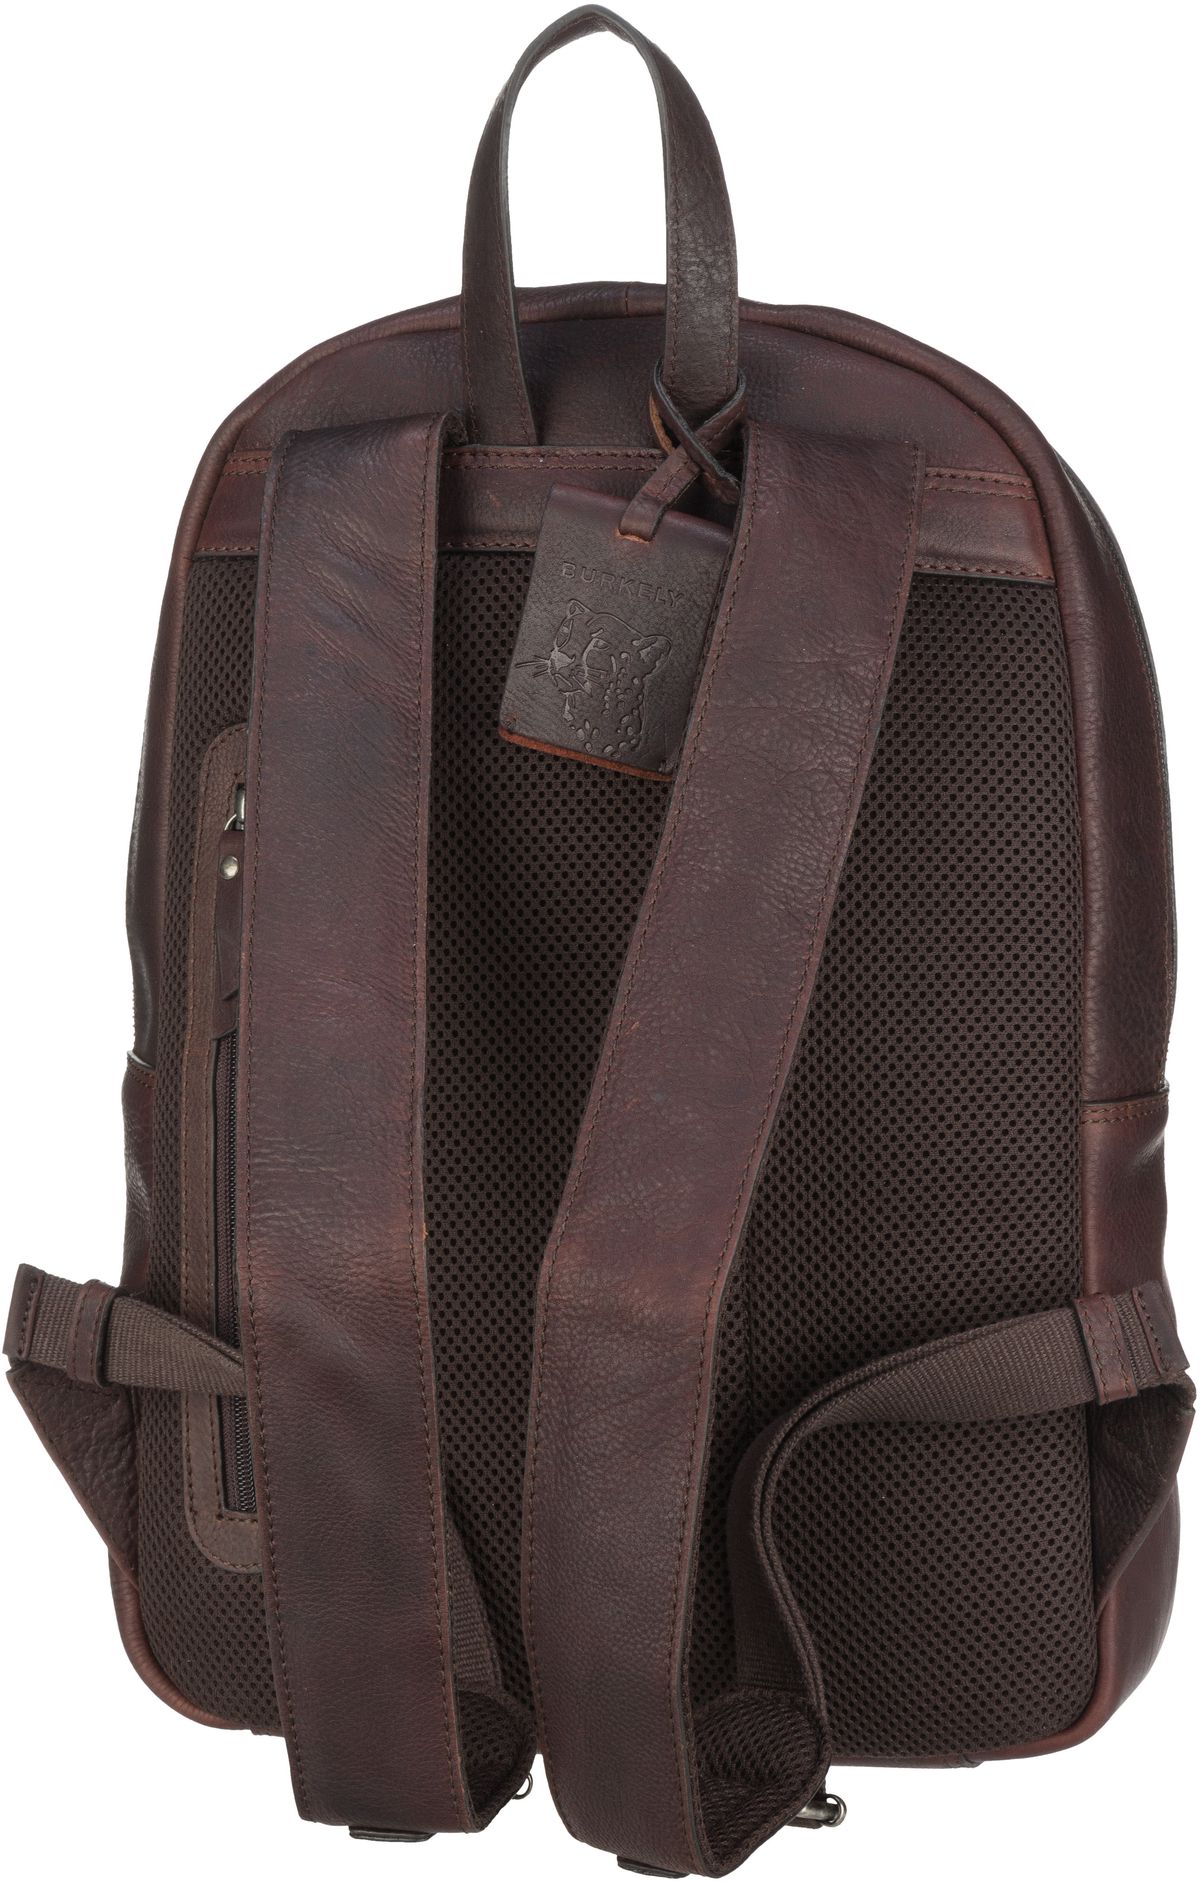 Burkely Antique Avery Backpack 7002 - Brown